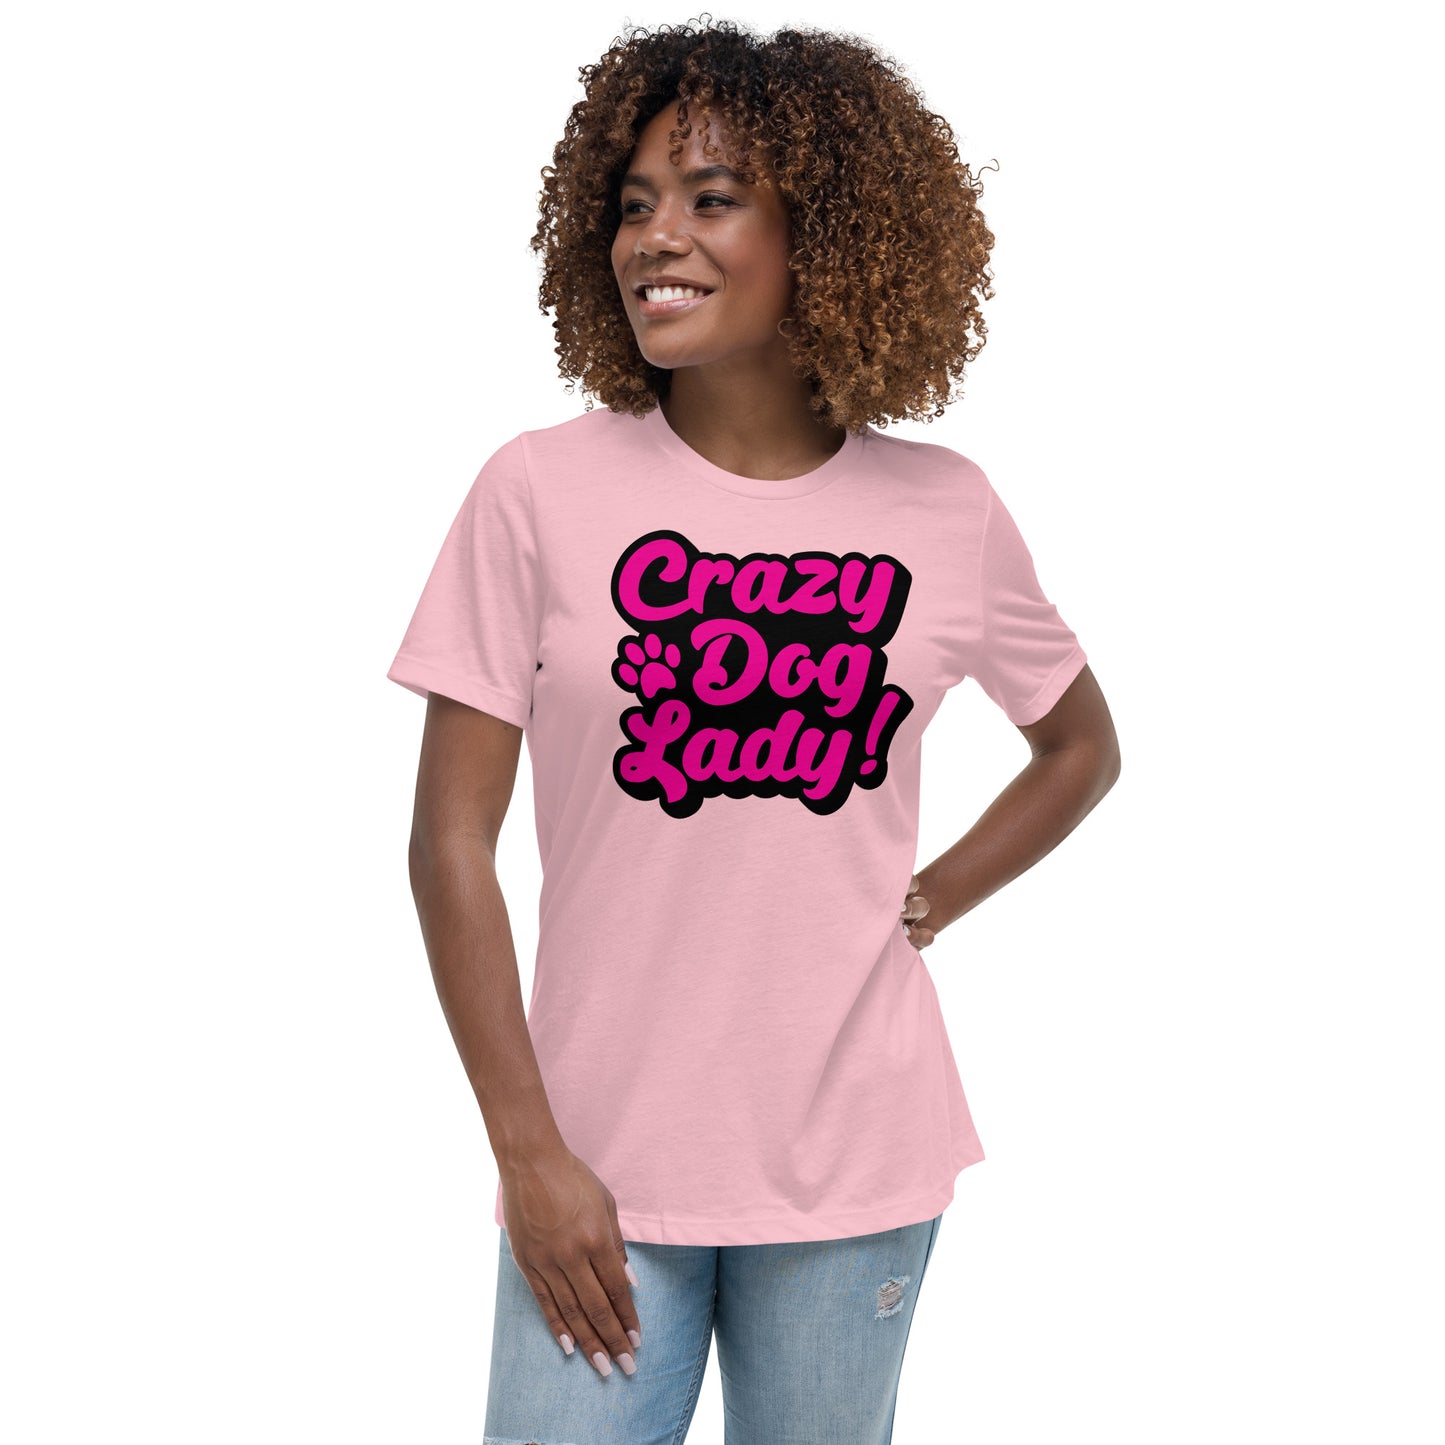 Crazy Dog Lady Women's Pink T-Shirt by Dog Artistry 